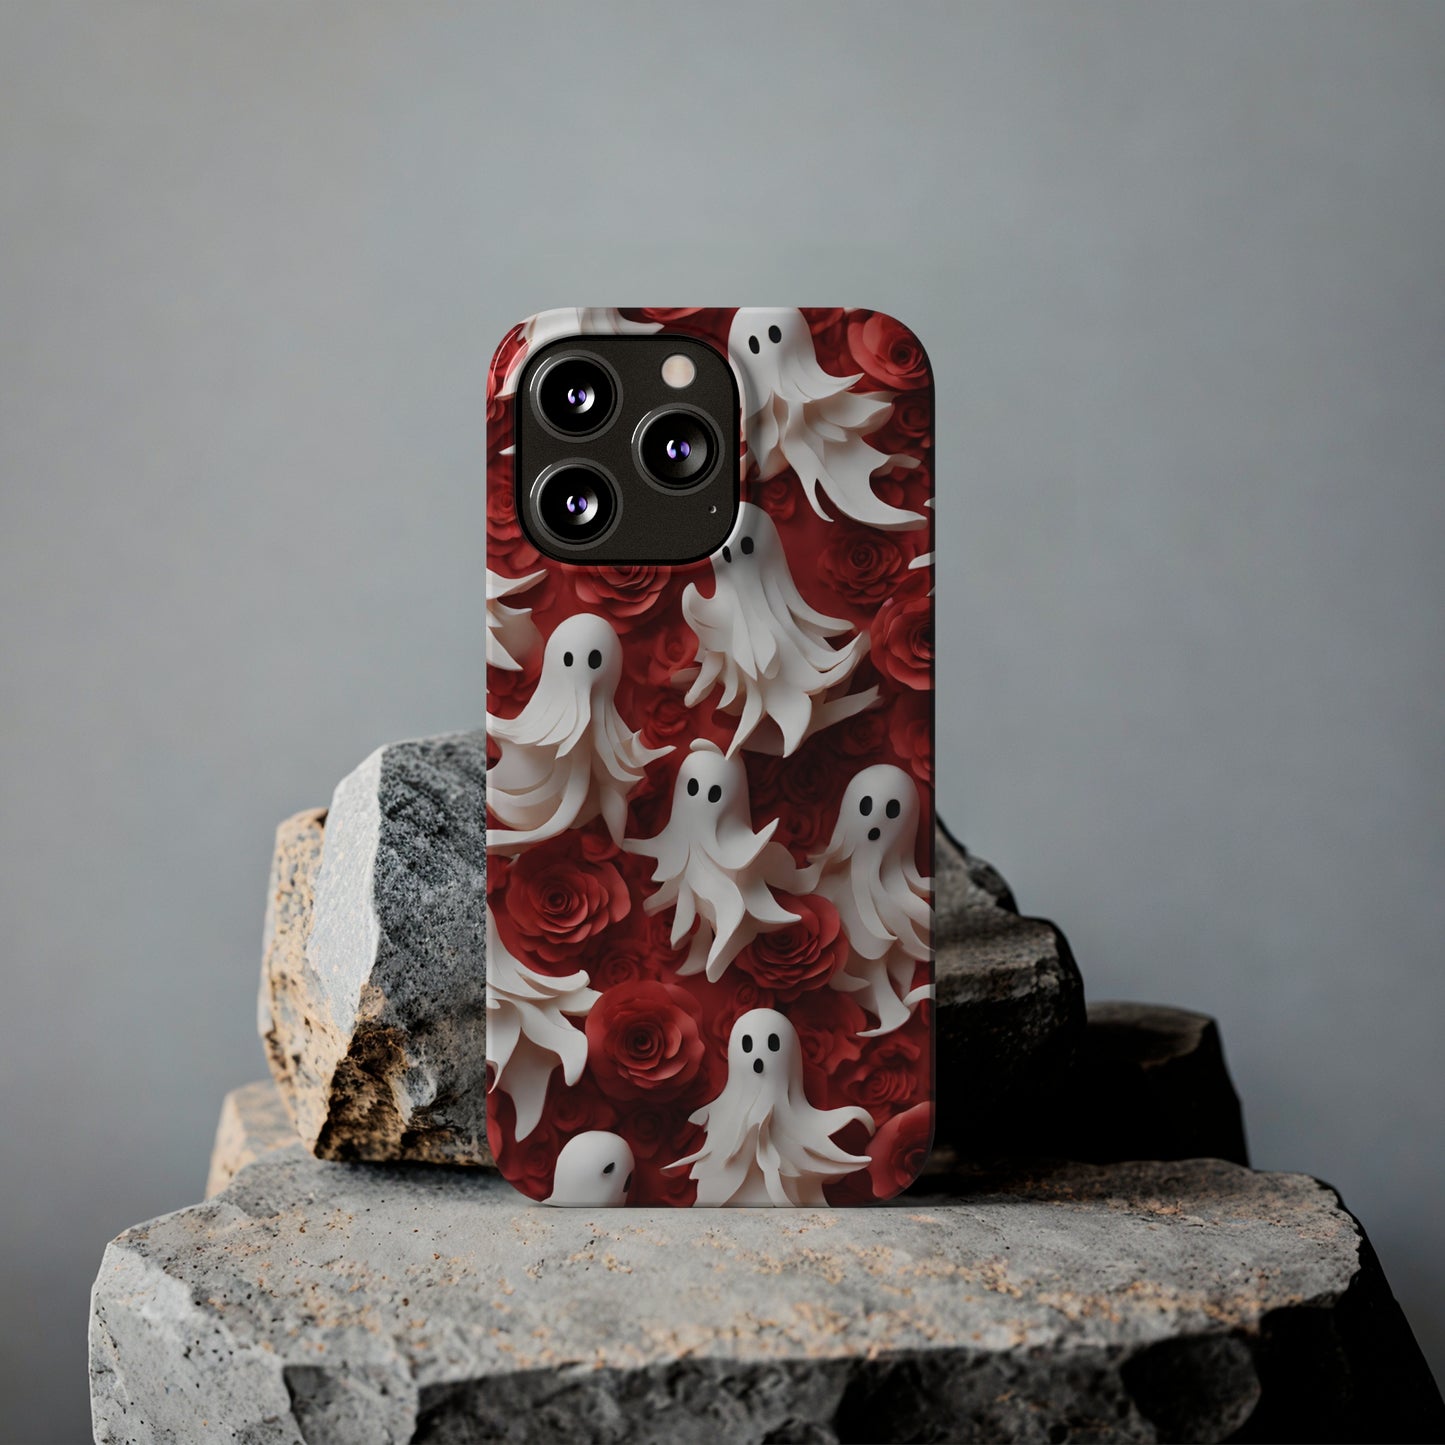 3D Ghosts with Red Flowers Slim Phone Cases